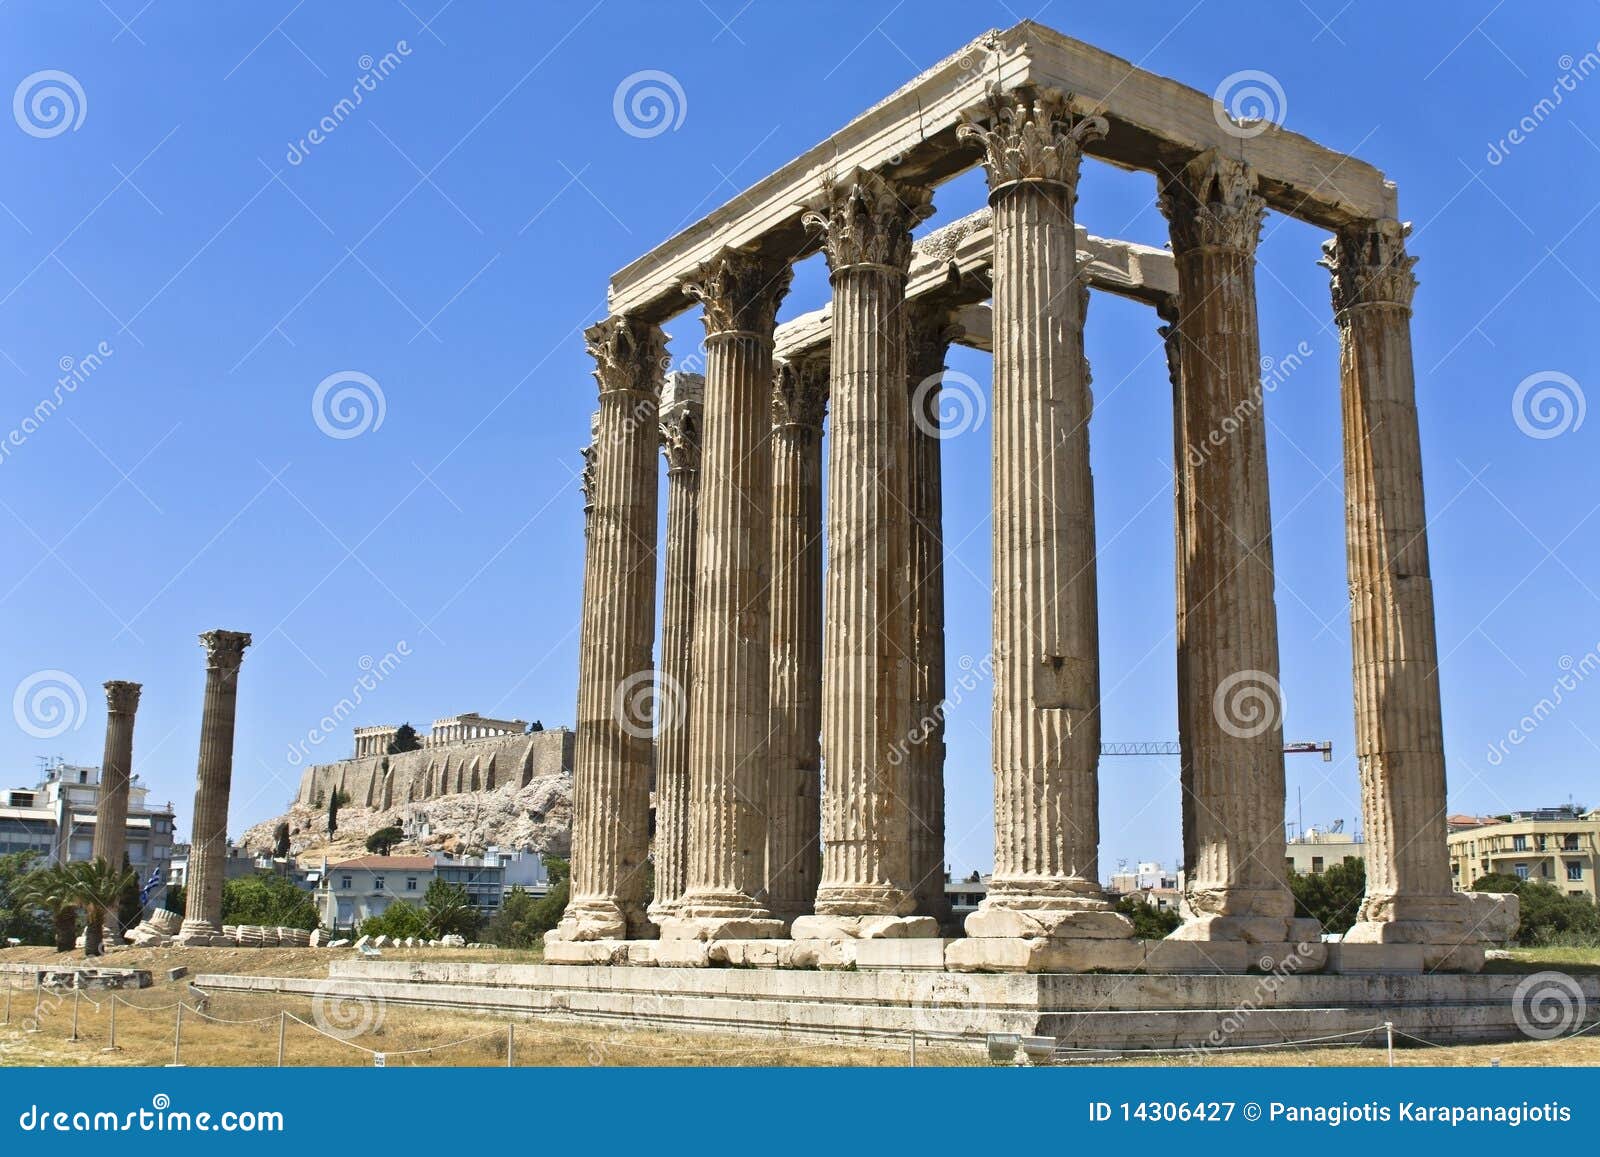 temple of the olympian zeus at athens